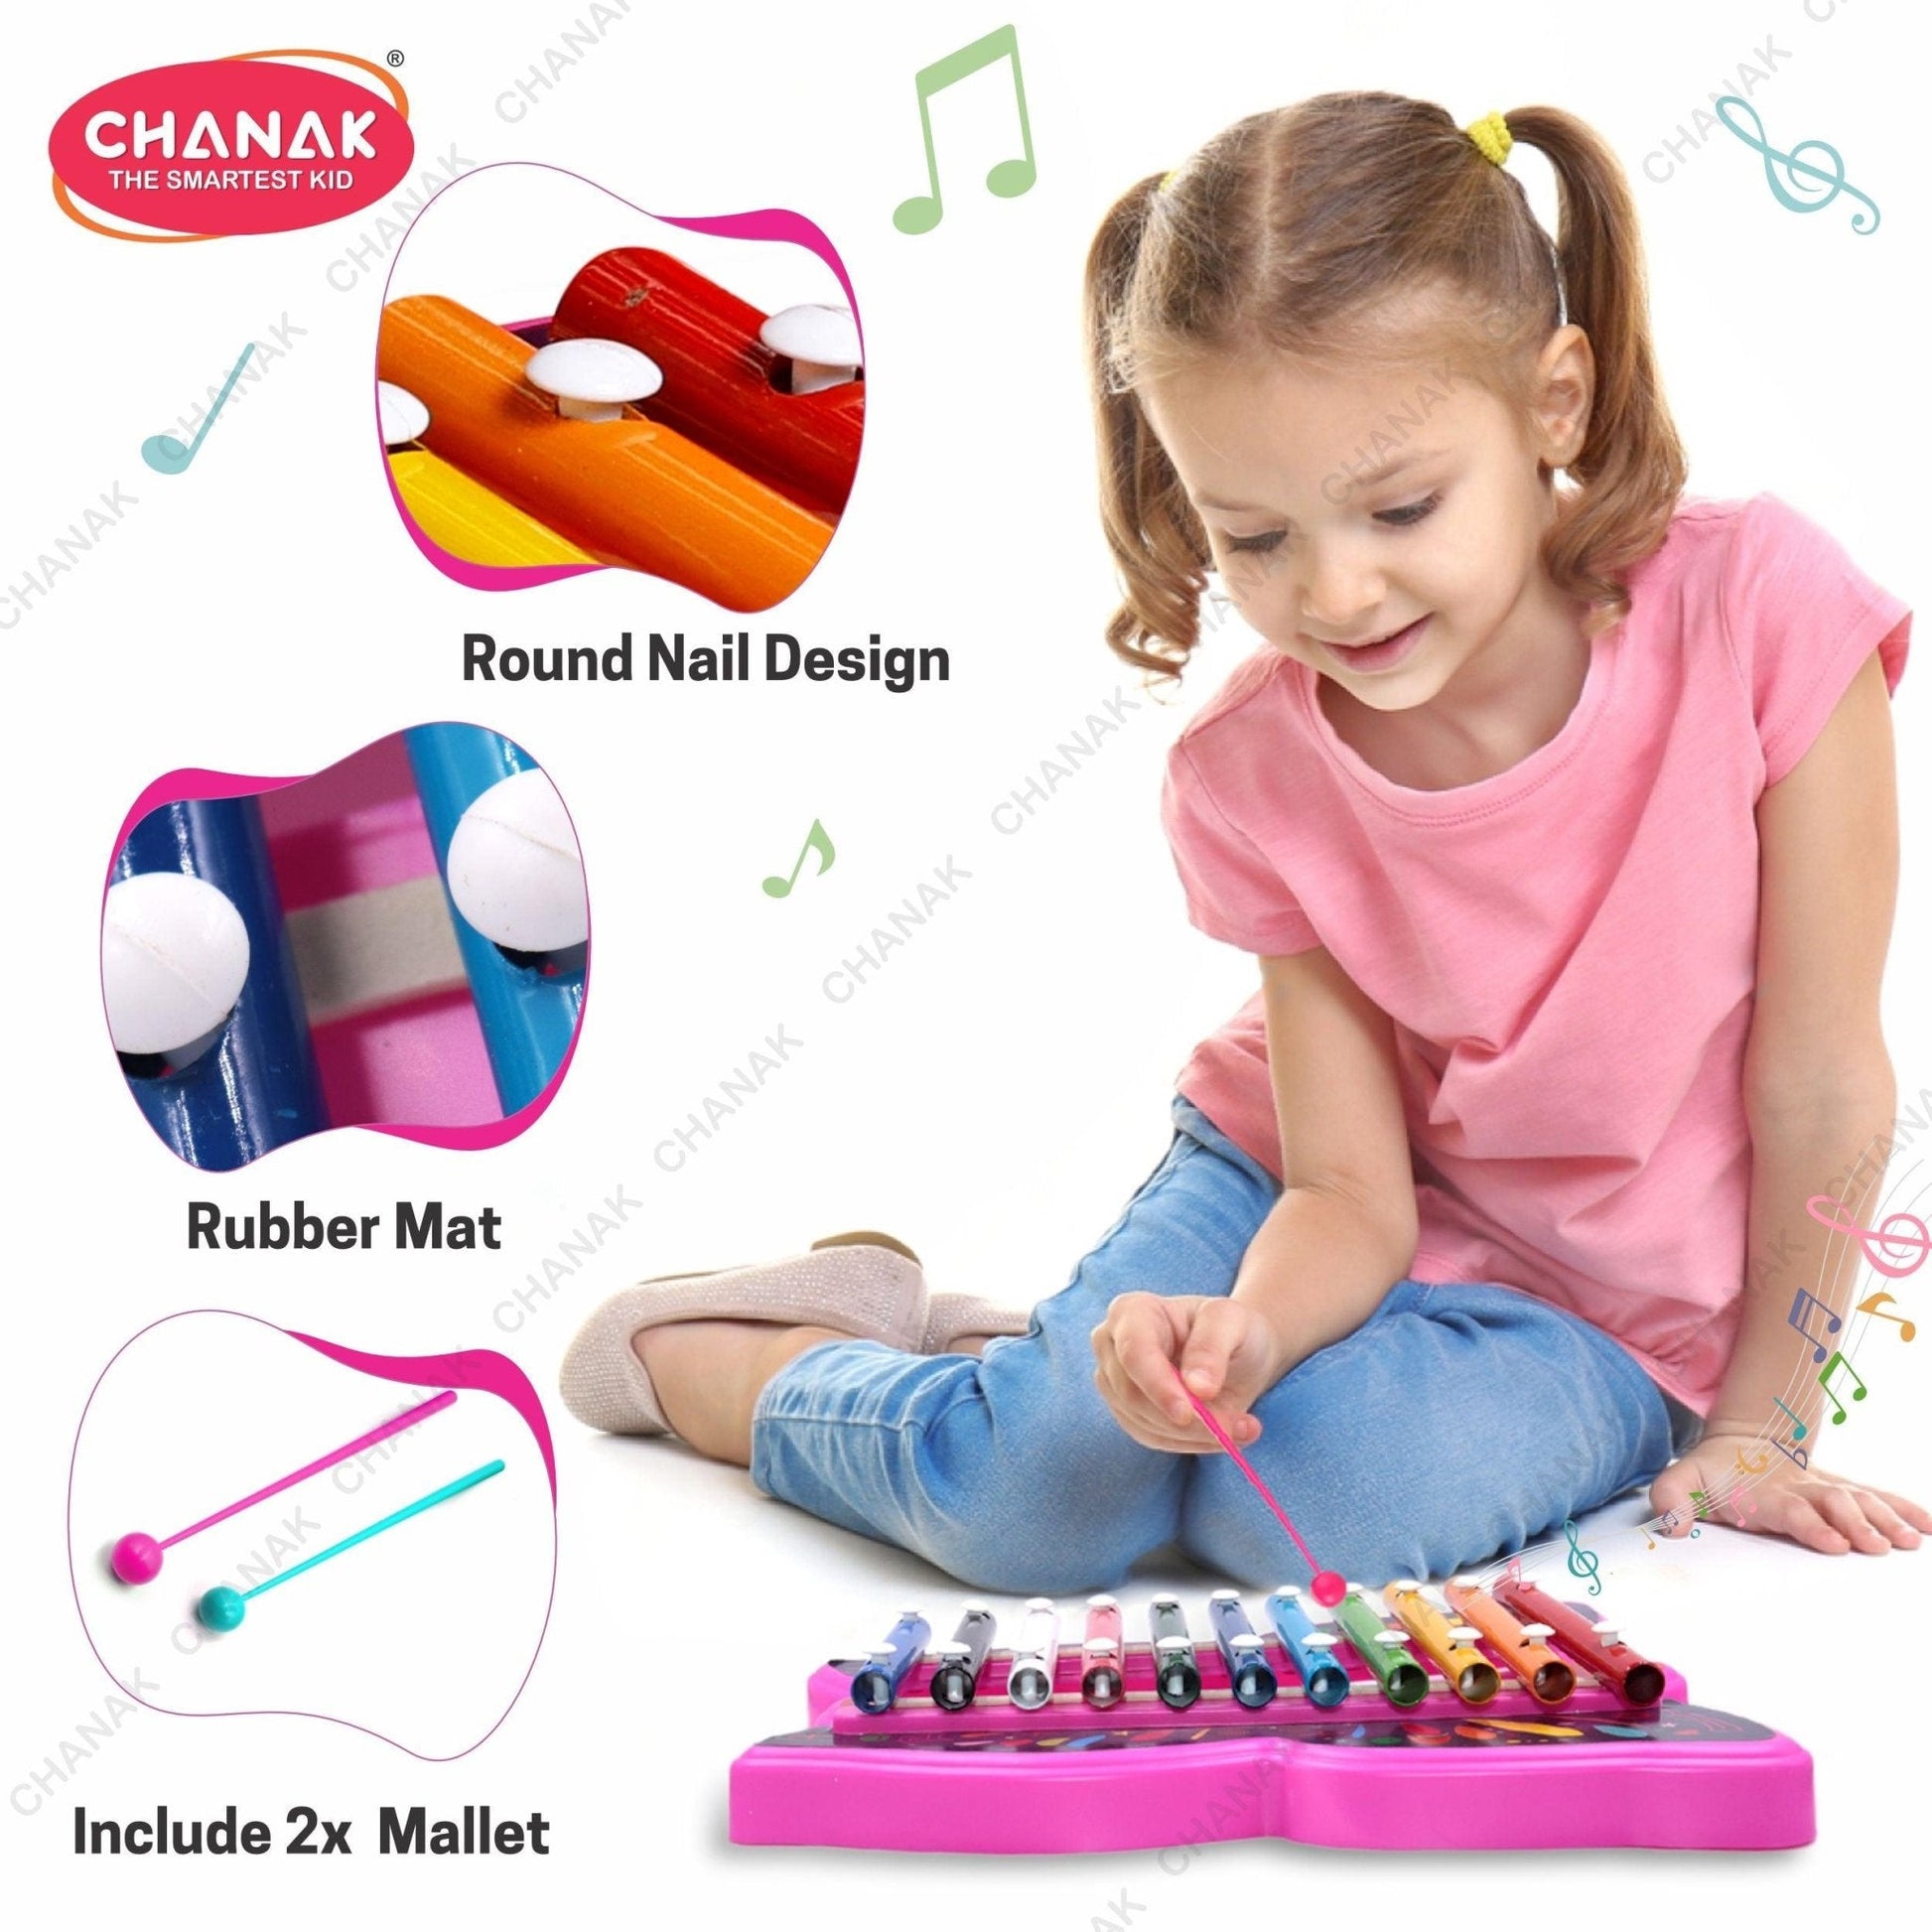 Chanak Musical Butterfly Xylophone Toy (Pink) - chanak